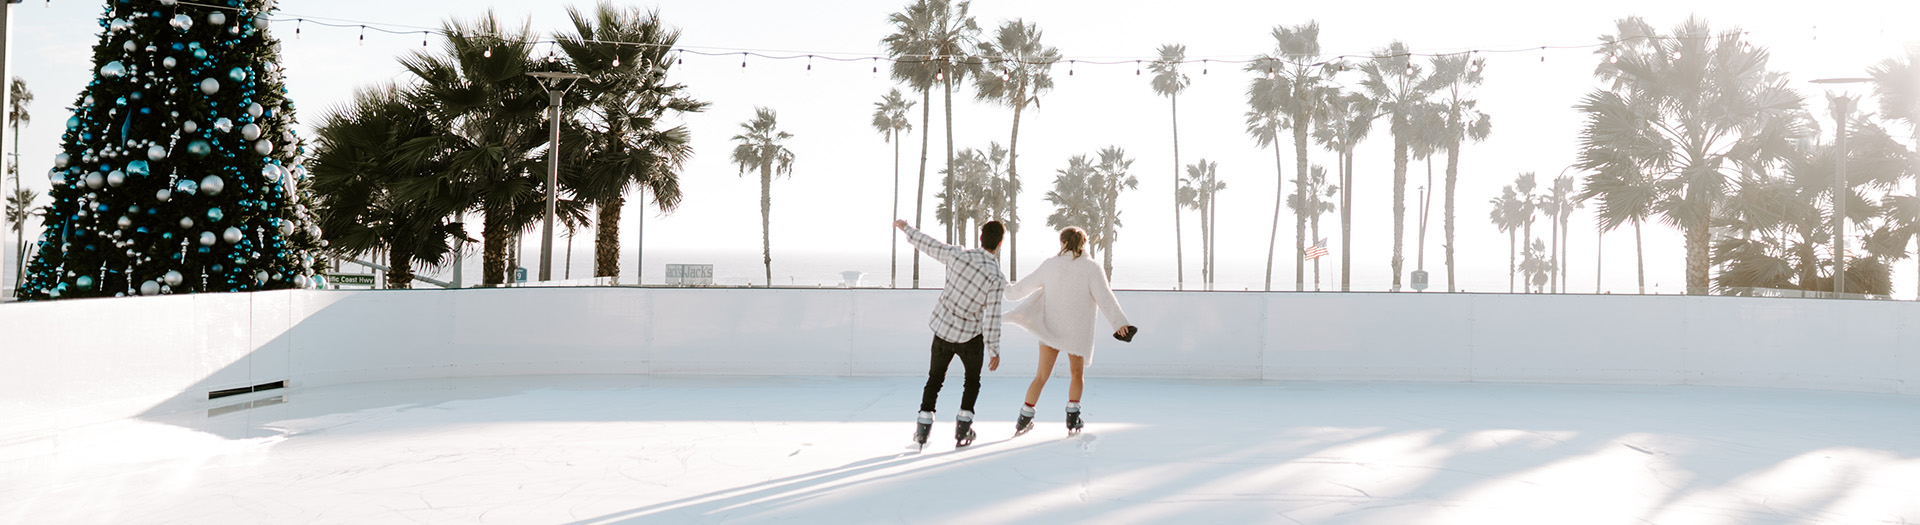 The Ice Rink at Paséa | Paséa Hotel & Spa